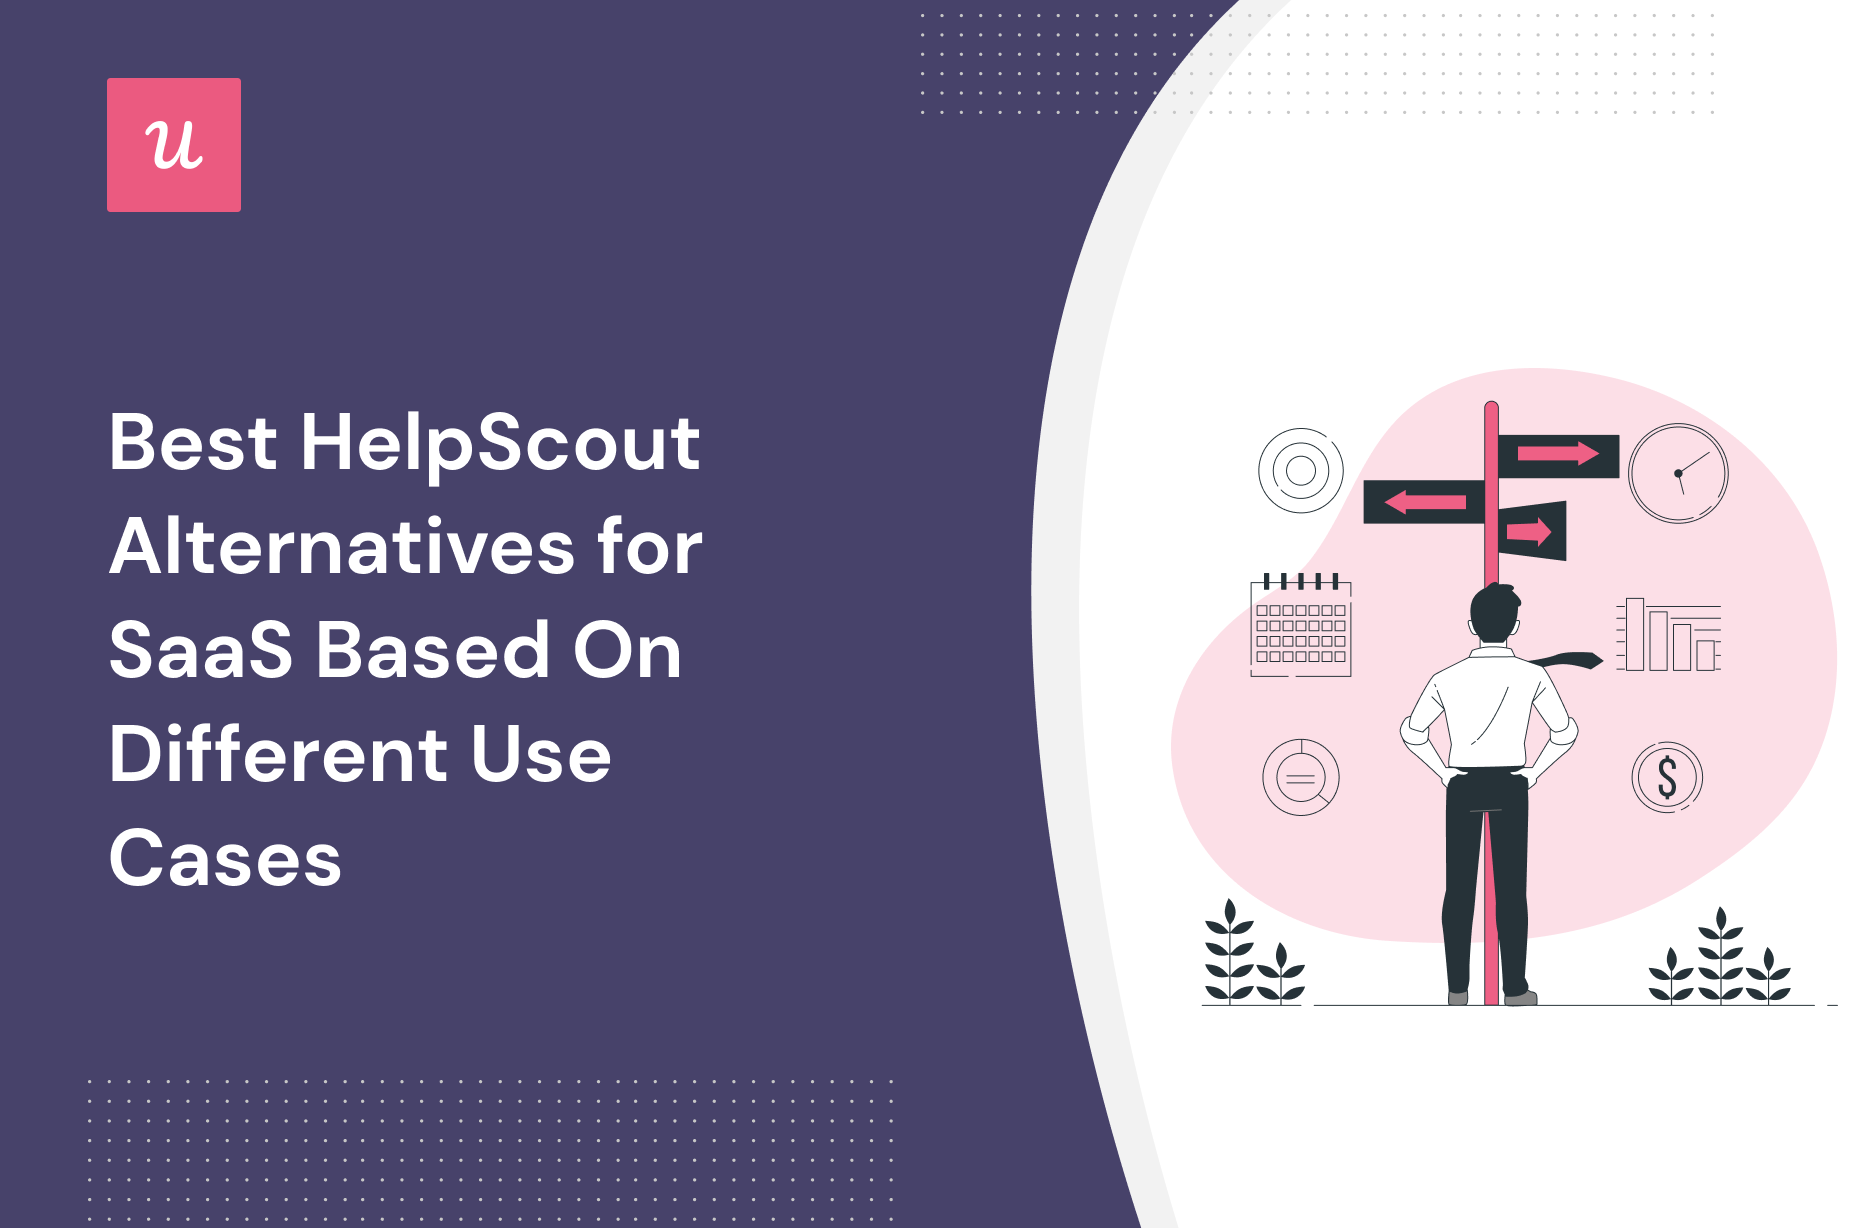 Best HelpScout Alternatives for SaaS Based On Different Use Cases